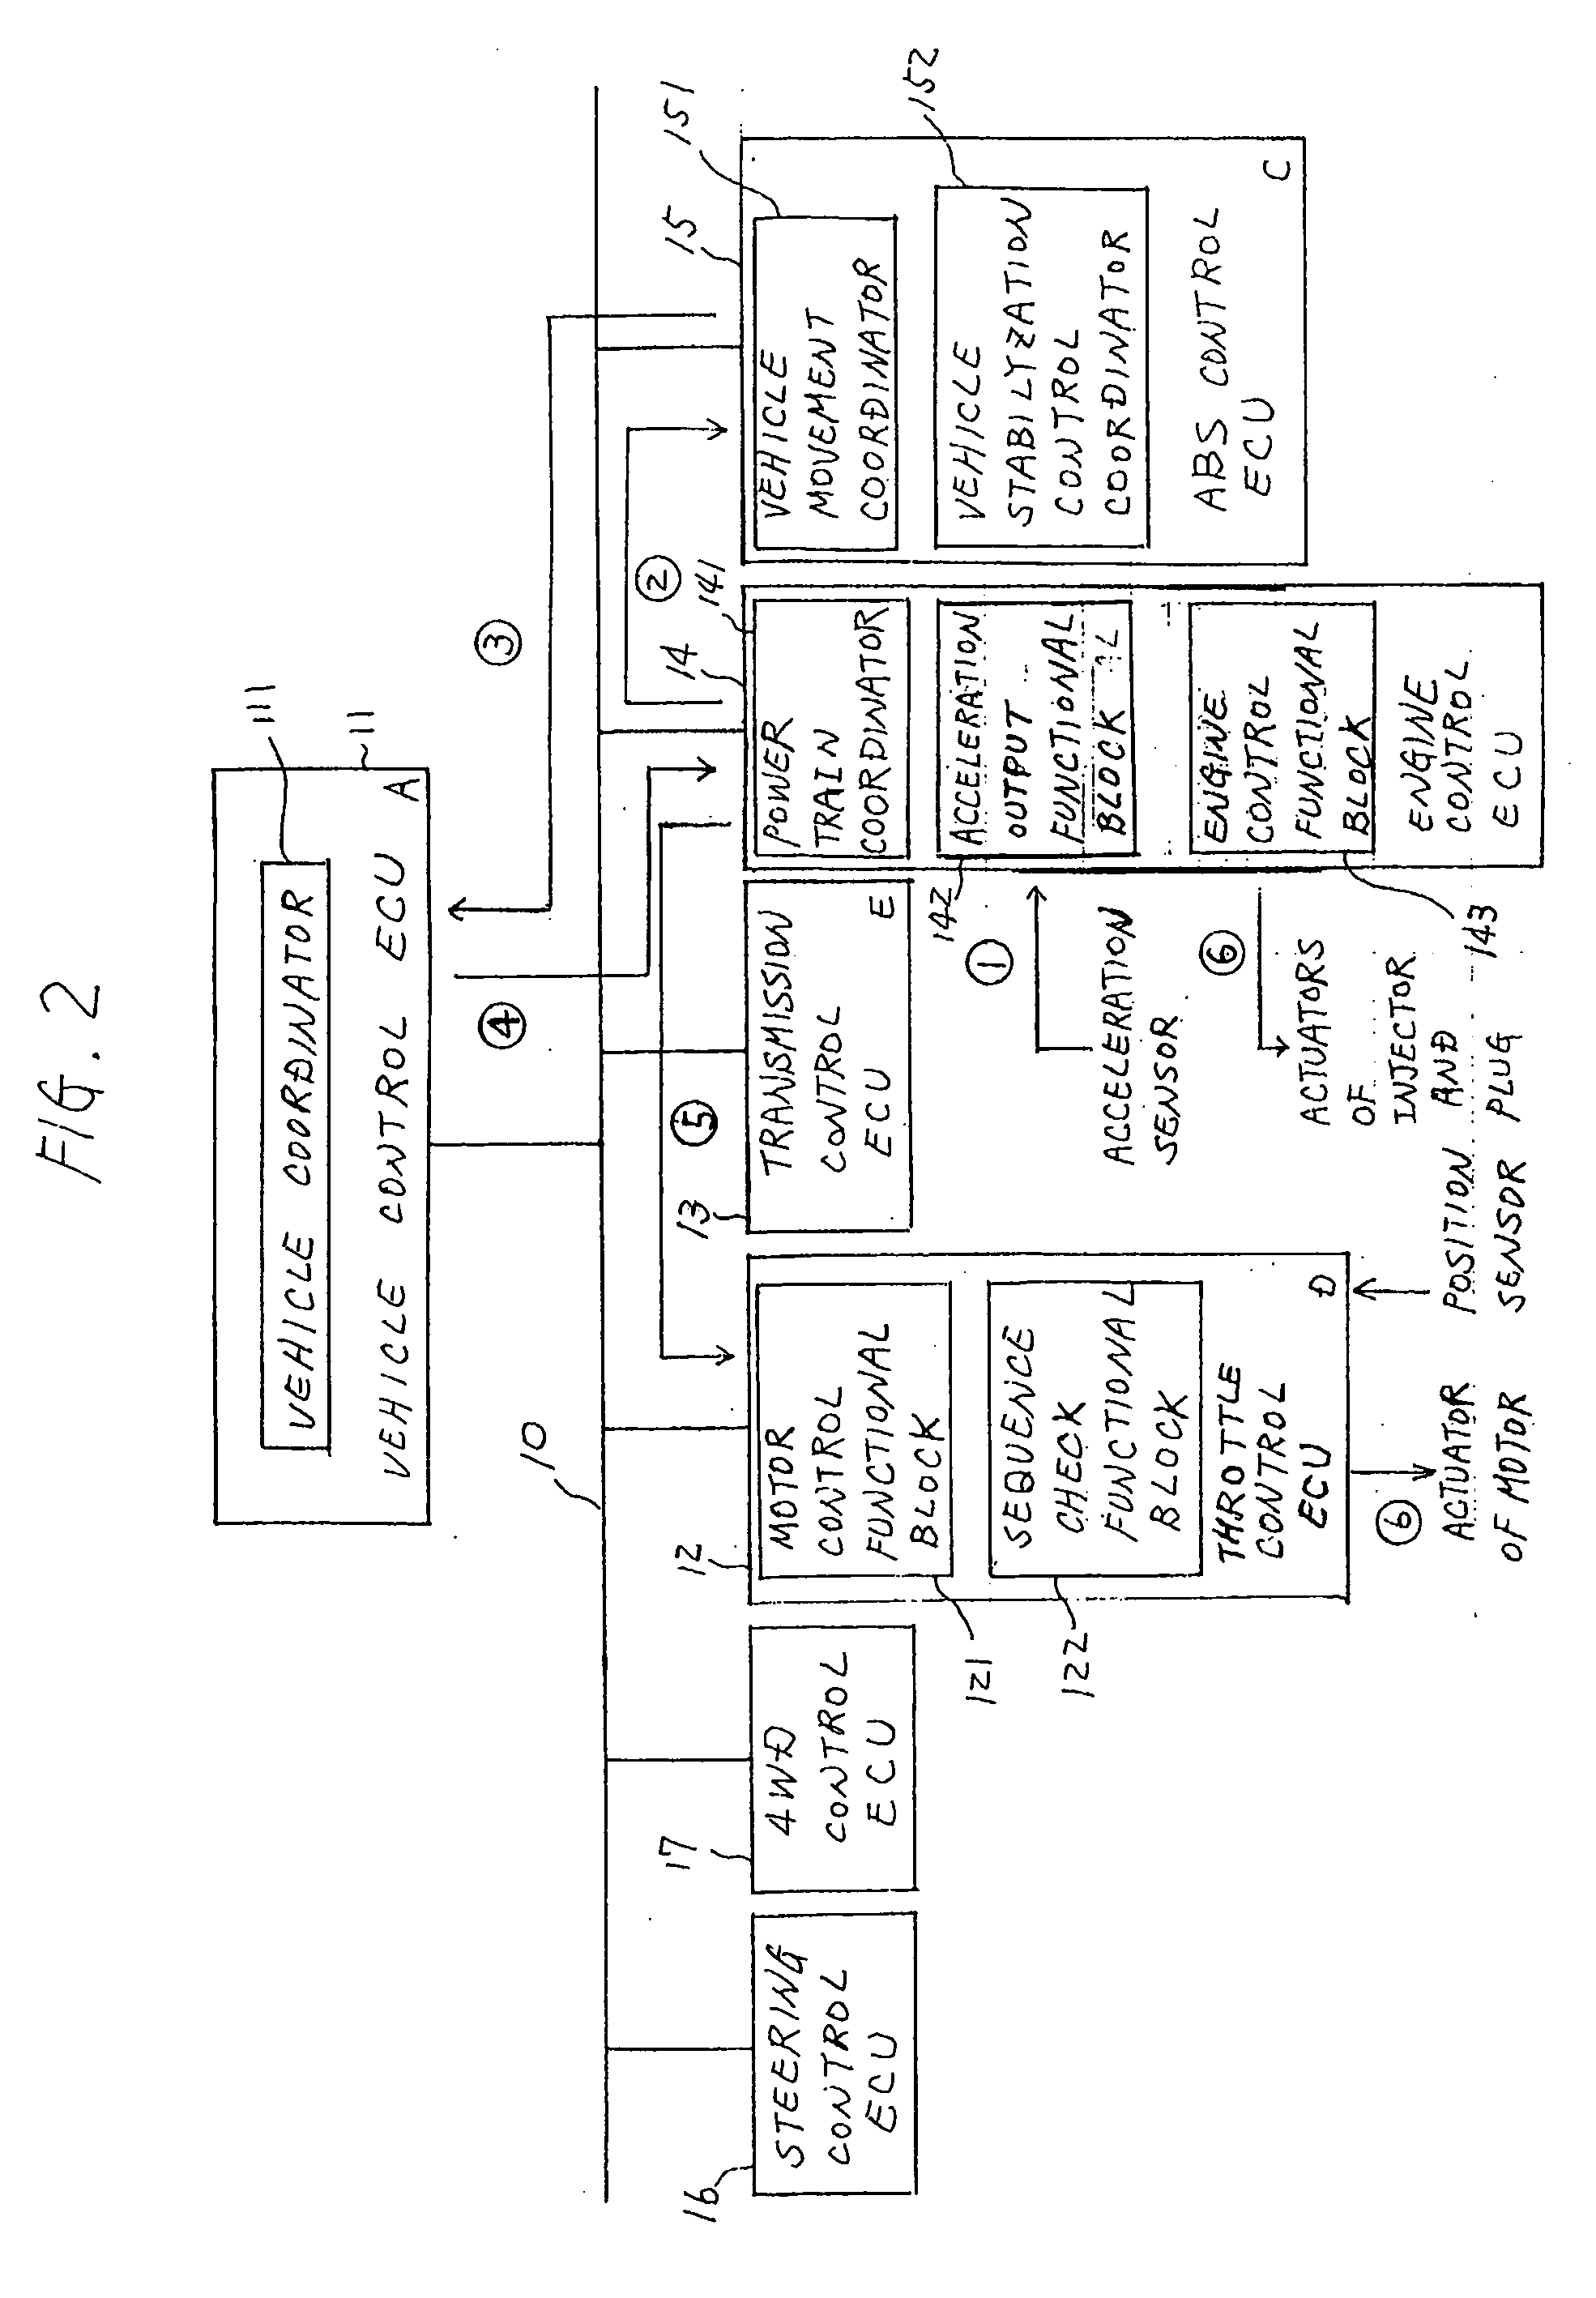 Vehicle control system for executing a series of processes in electronic control units